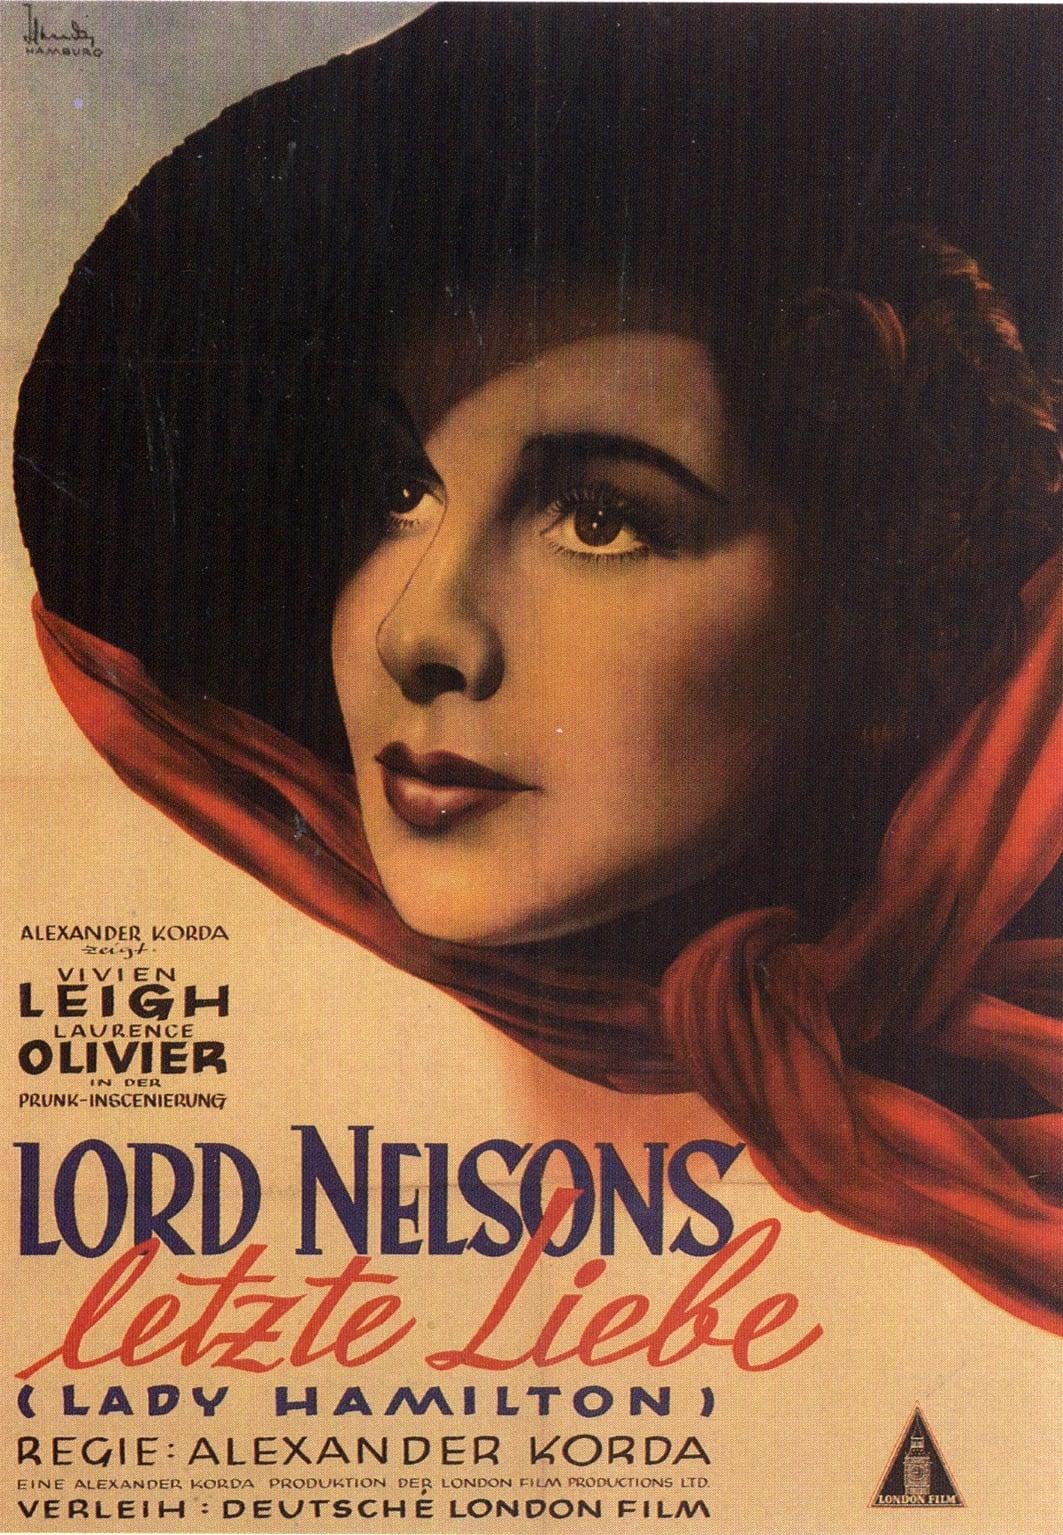 Lord Nelsons letzte Liebe poster